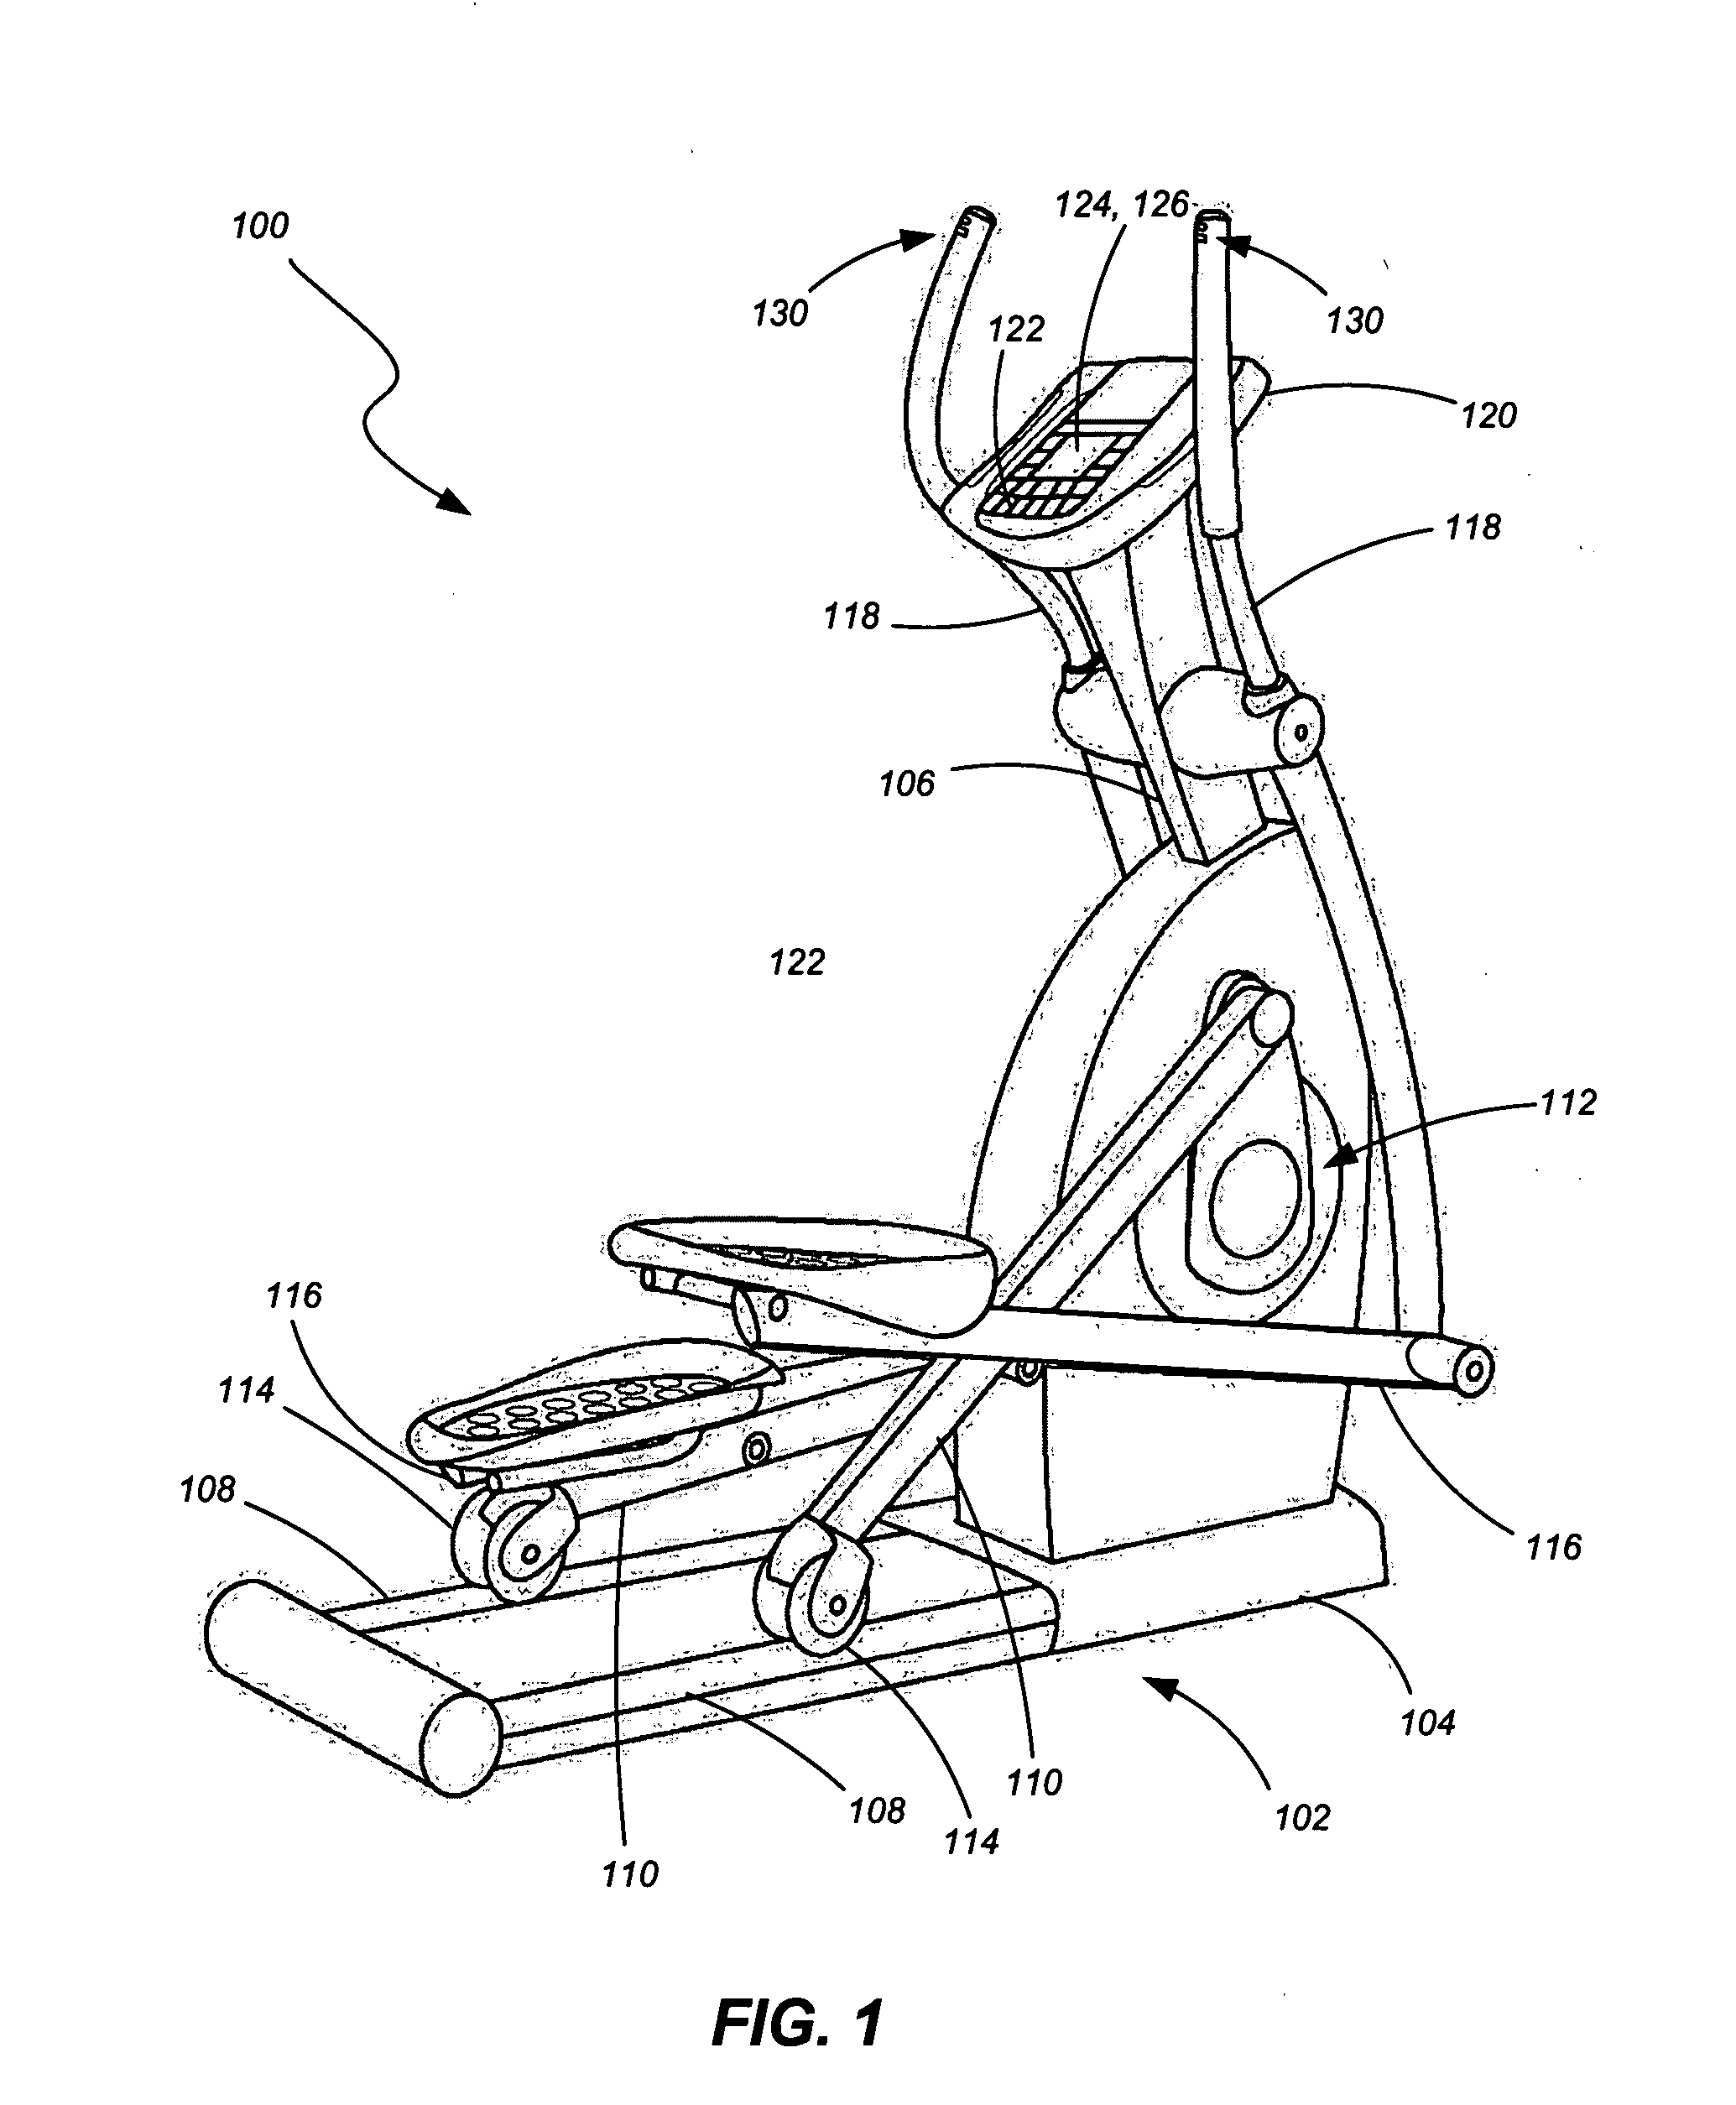 Exercise apparatuses, components for exercise apparatuses and related methods